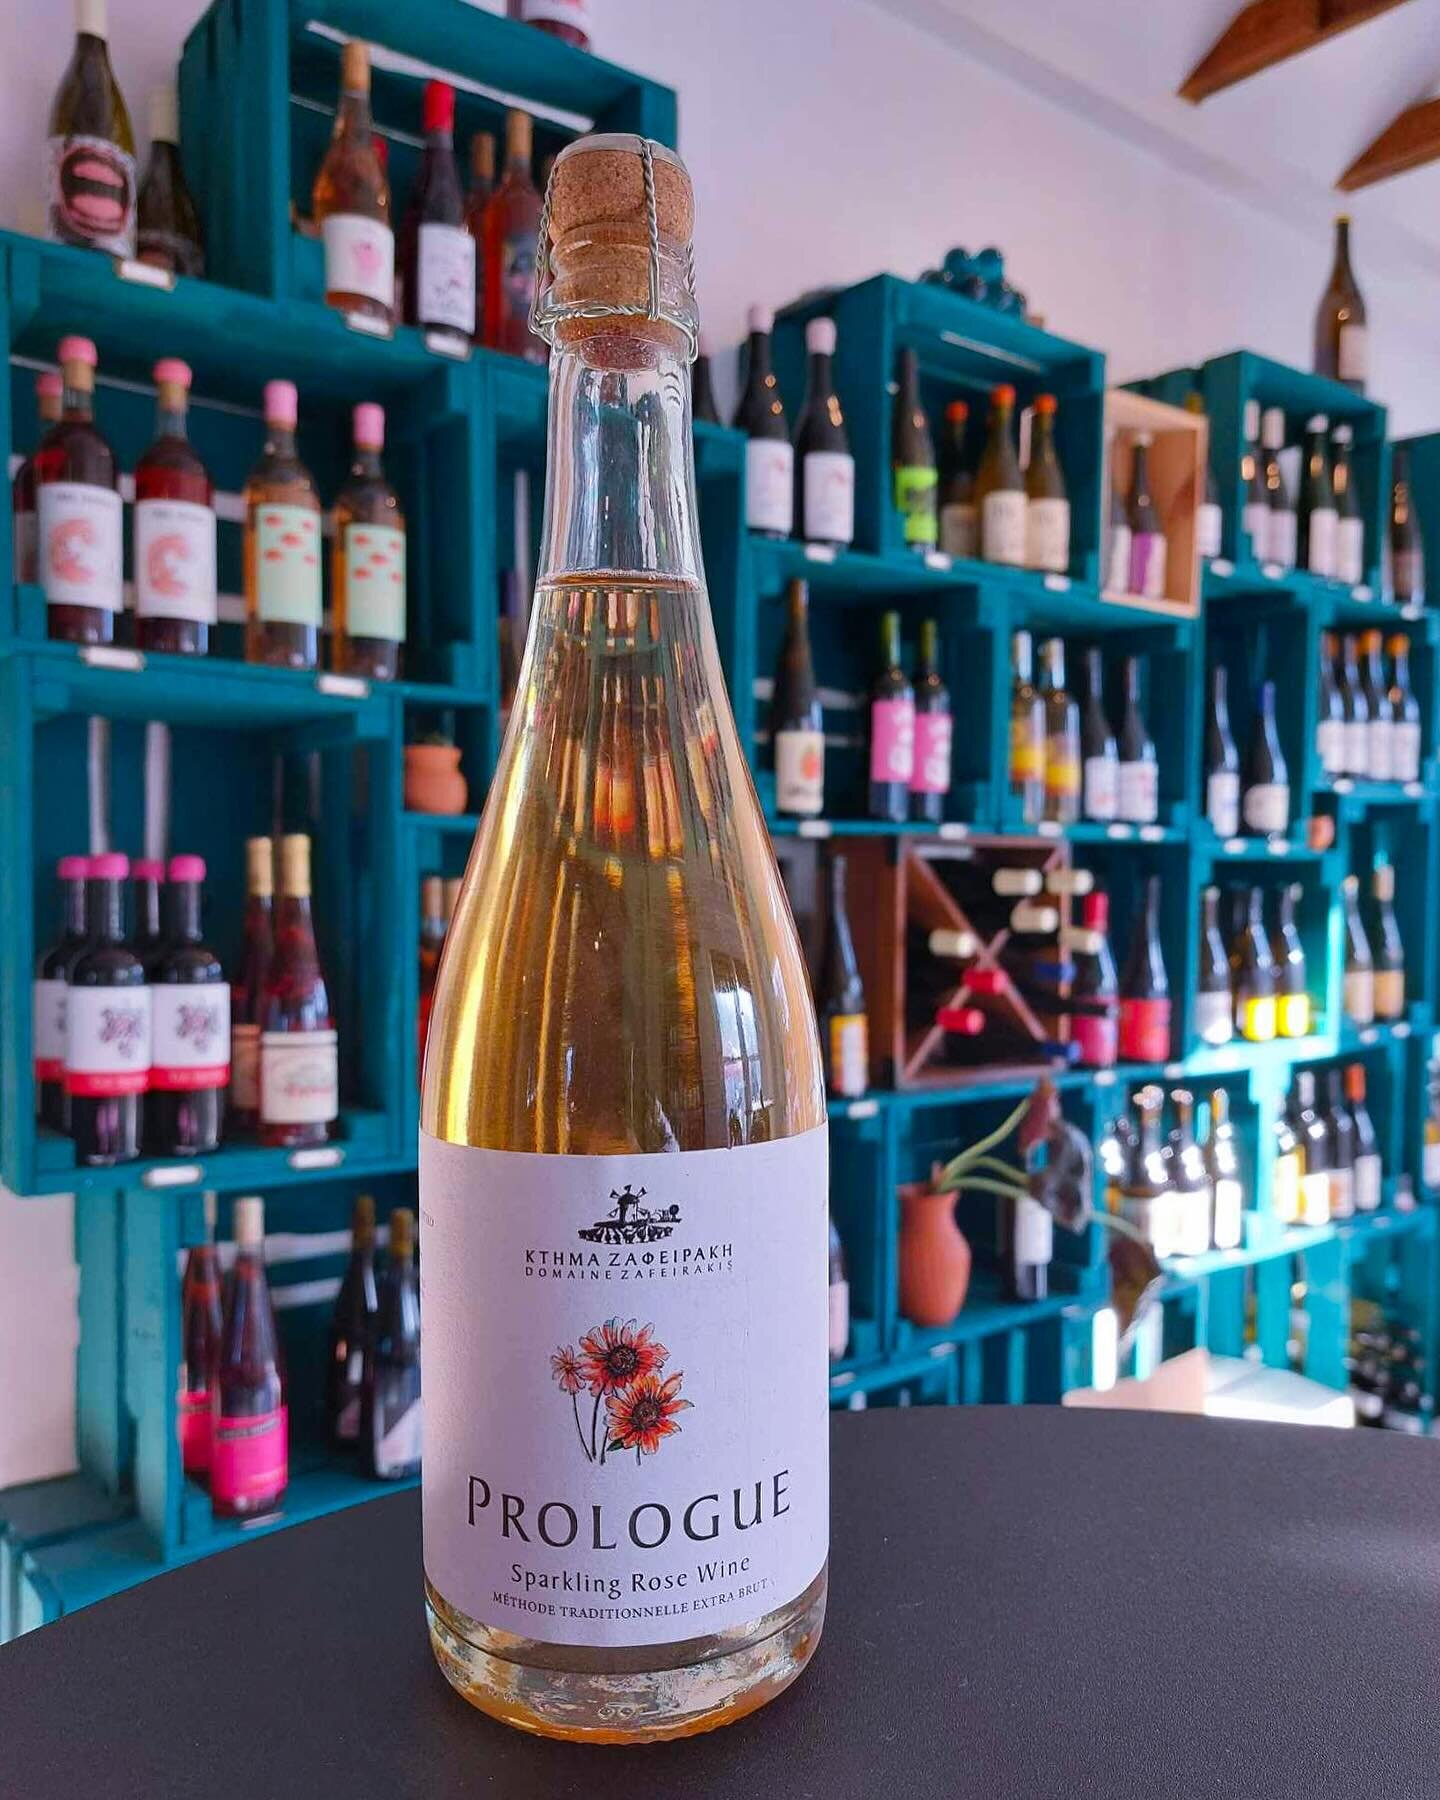 A solid showing for this weekend (including some stand out Greek wines 🇬🇷). See you soon!

🧿 Zafeirakis &ldquo;Prologue&rdquo; - These Greek bubbles are the perfect solution for dreary winter weather. Crisp, clean, fresh, and lean.

🫧 Glinavos &l